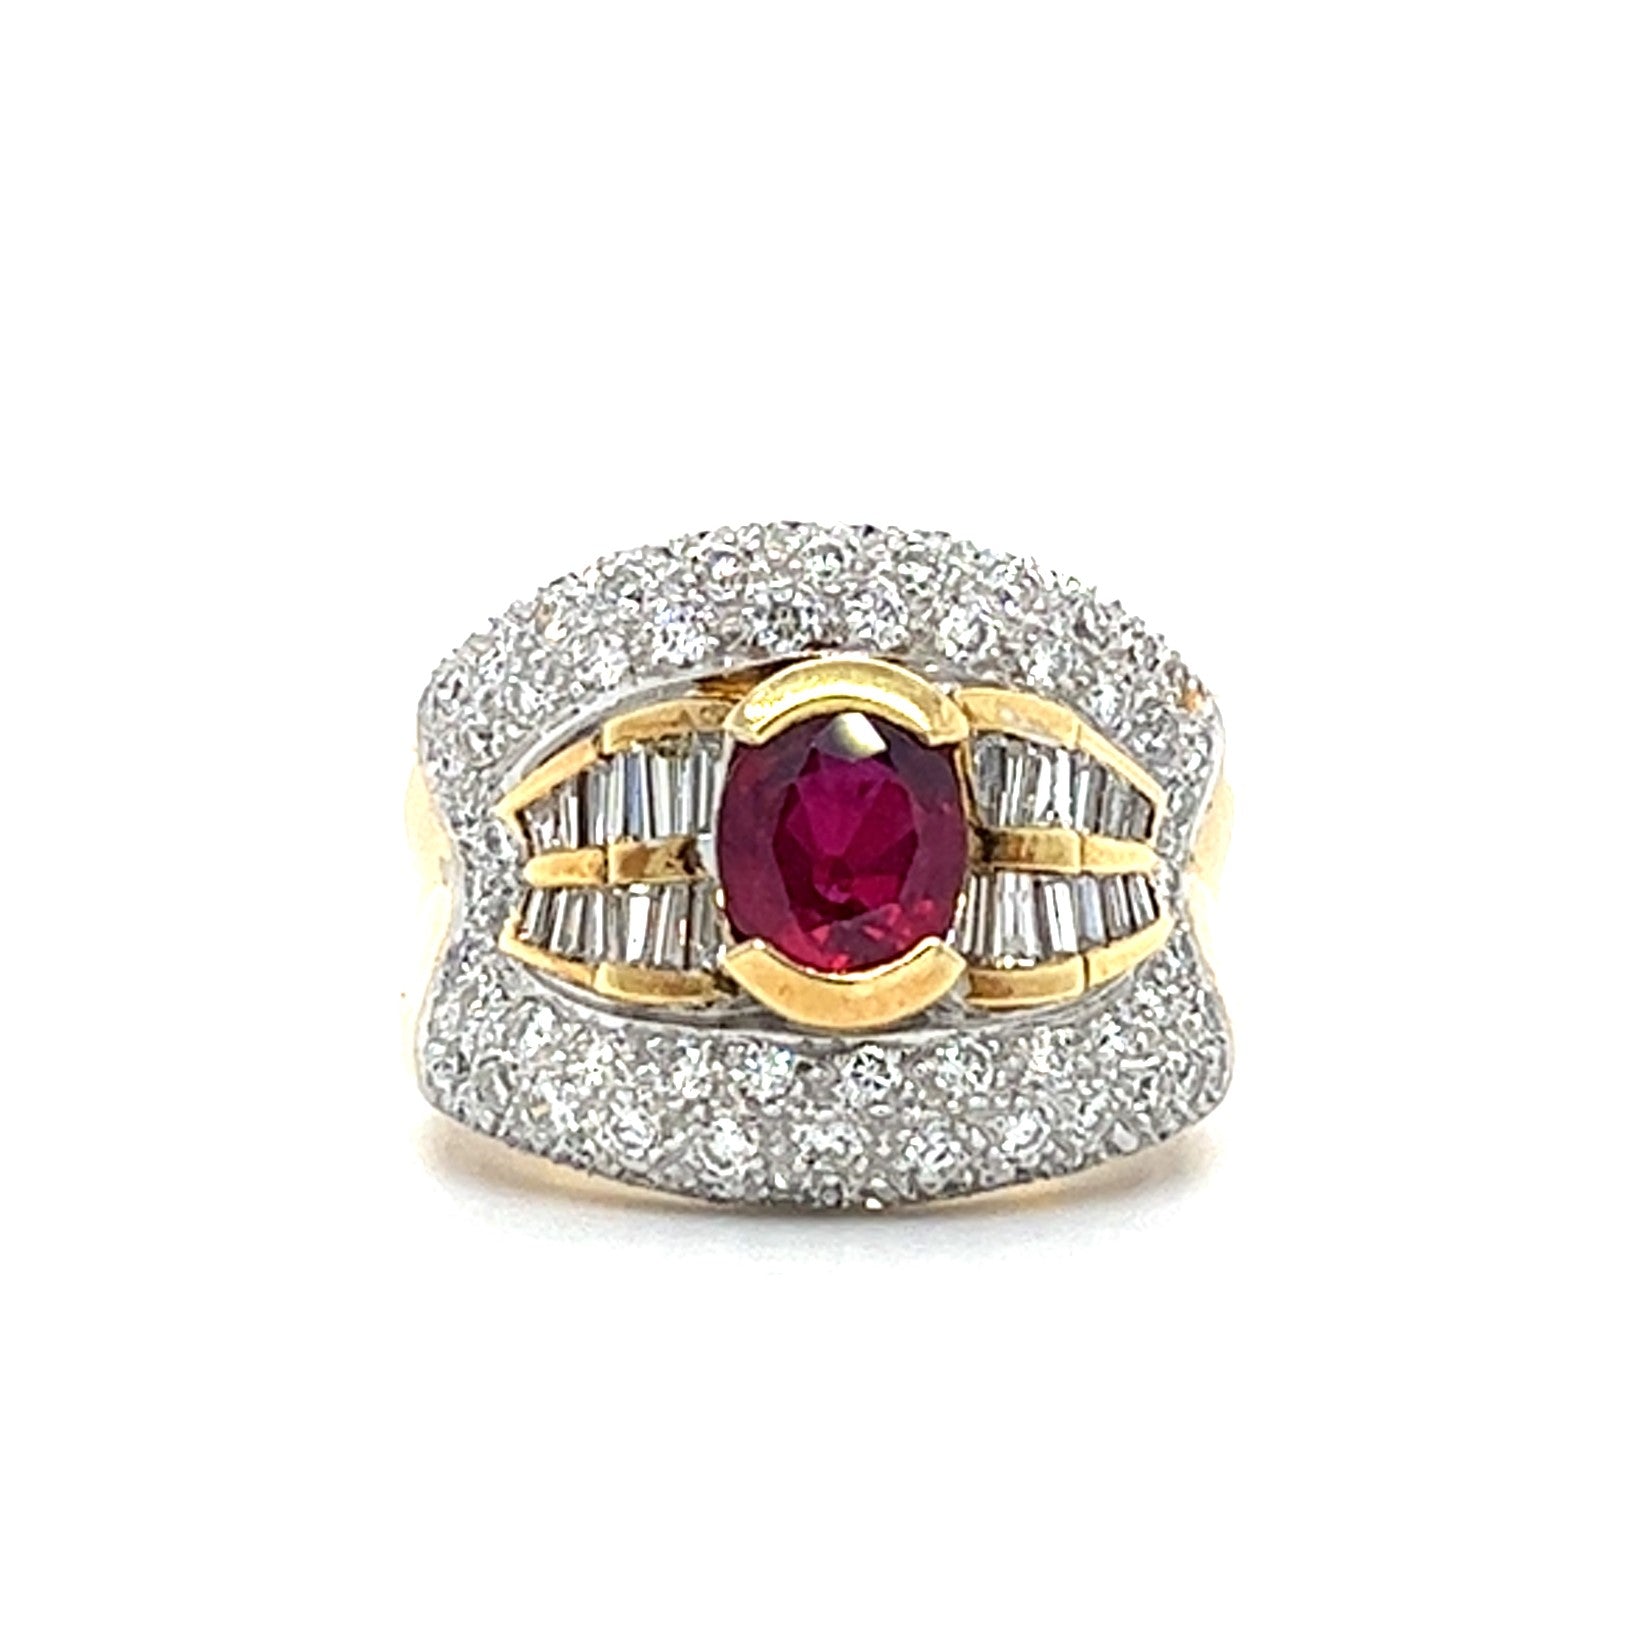 18KT YELLOW GOLD DIAMOND AND RUBY LADIES RING